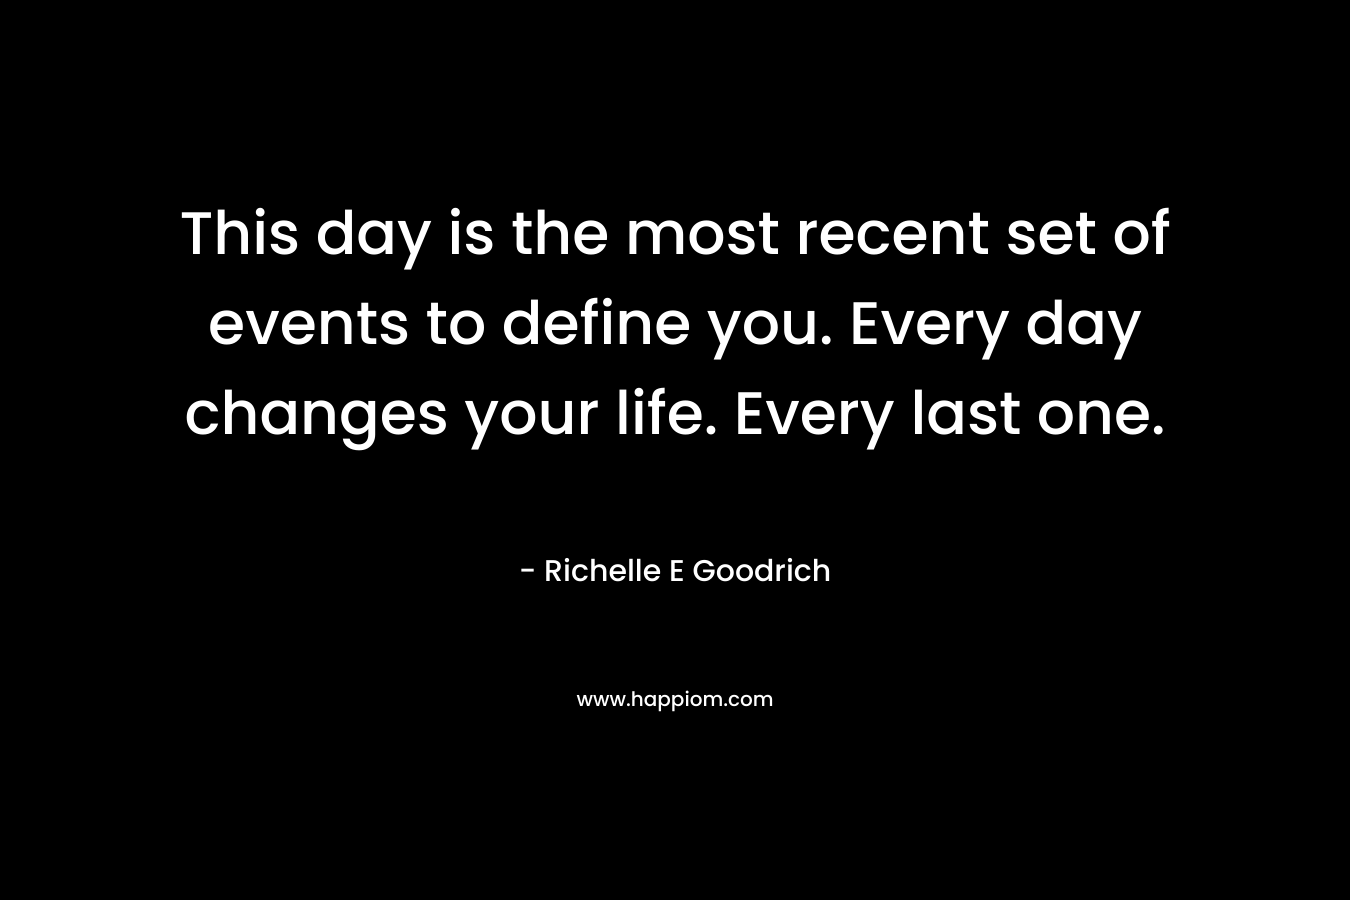 This day is the most recent set of events to define you. Every day changes your life. Every last one.